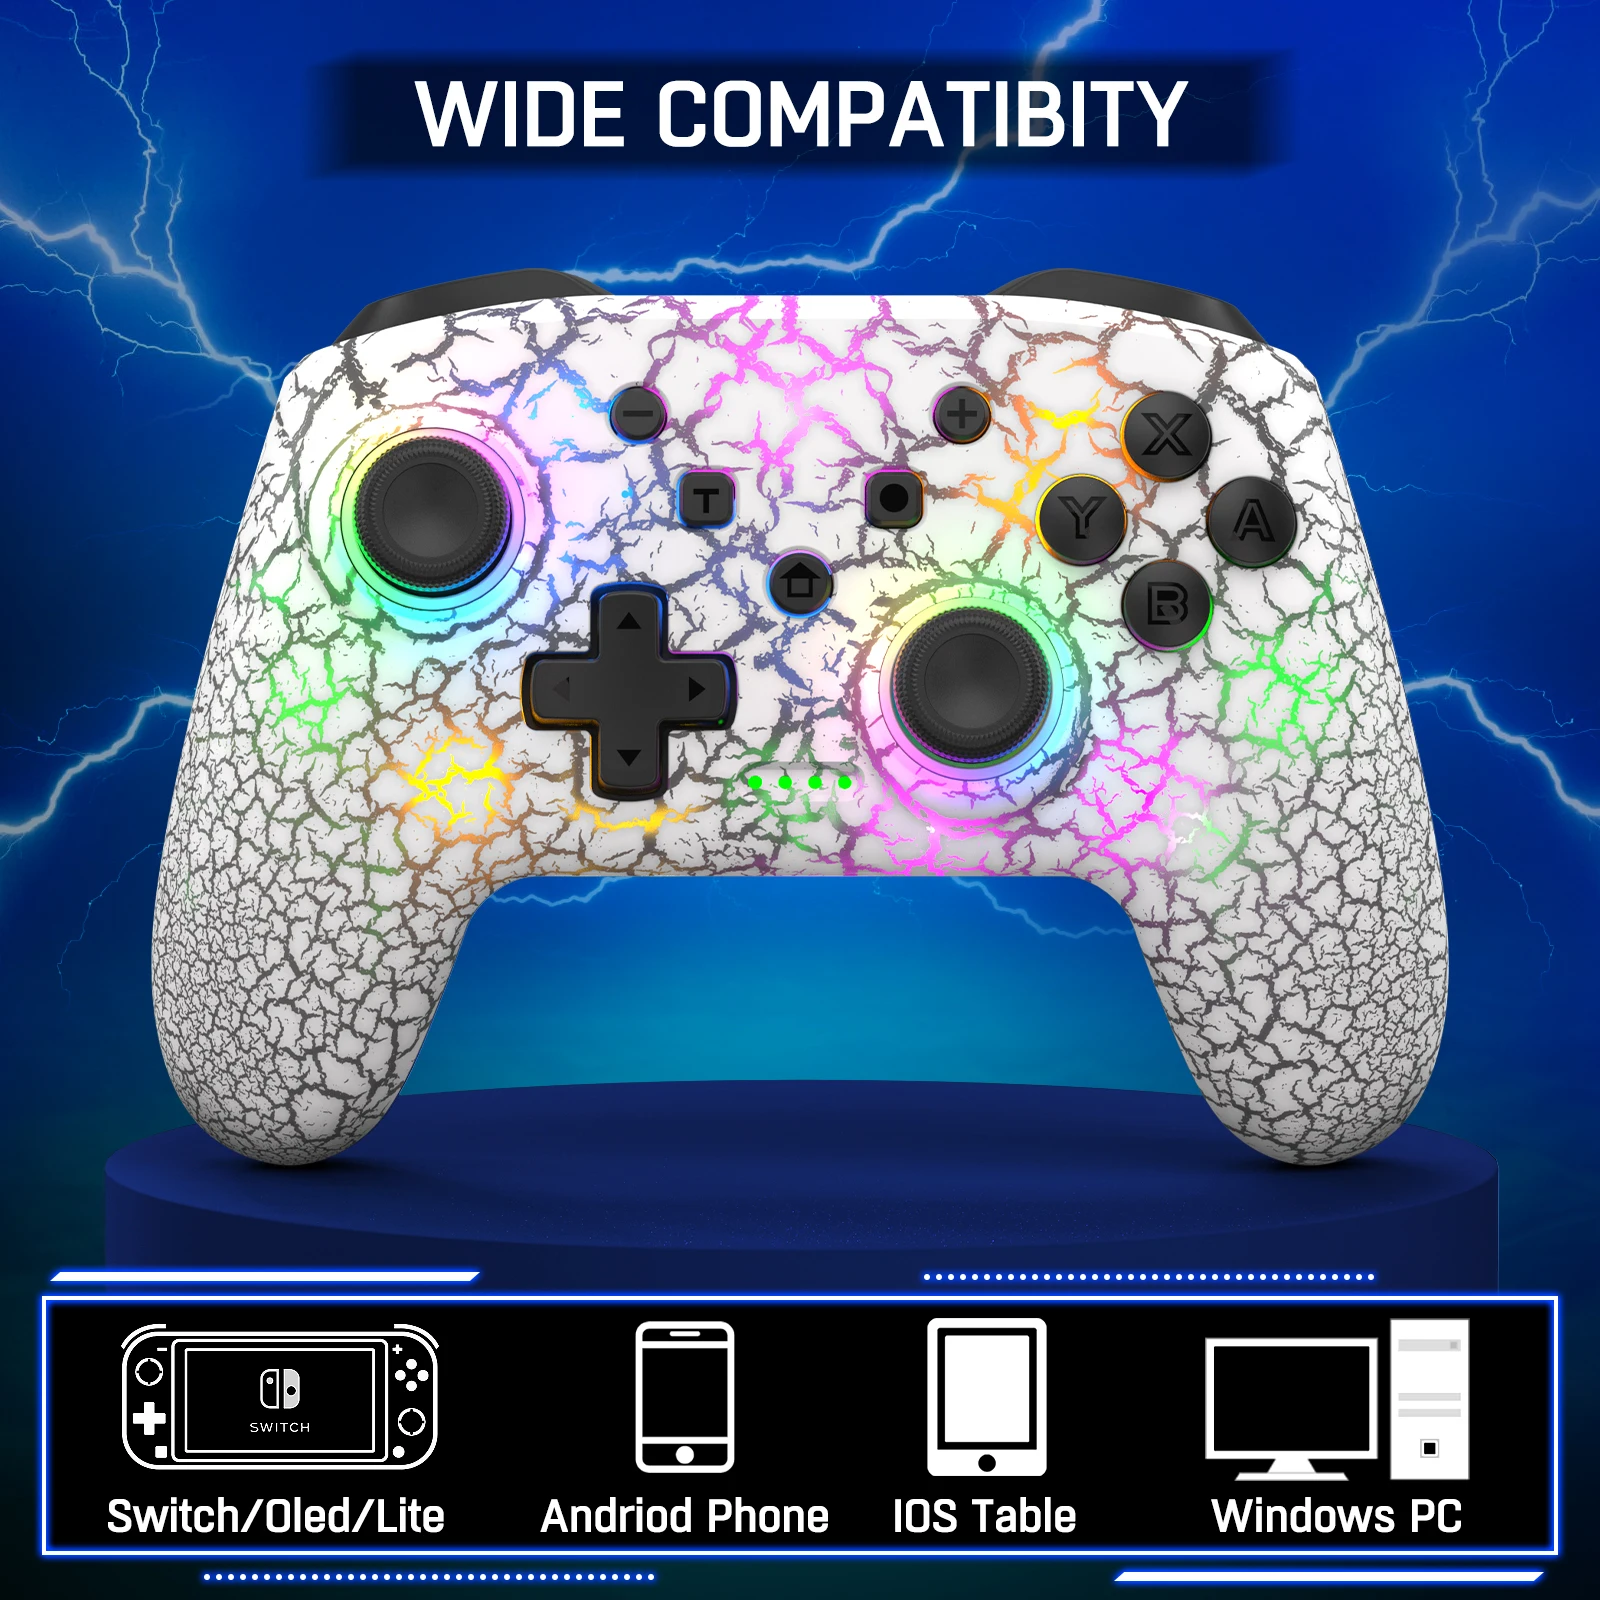 Switch Controller Compatible with Switch/Switch Lite/Switch OLED/Windows/iOS/Android, RGB Lightning Programmable 1000mAh Wireless Switch Pro